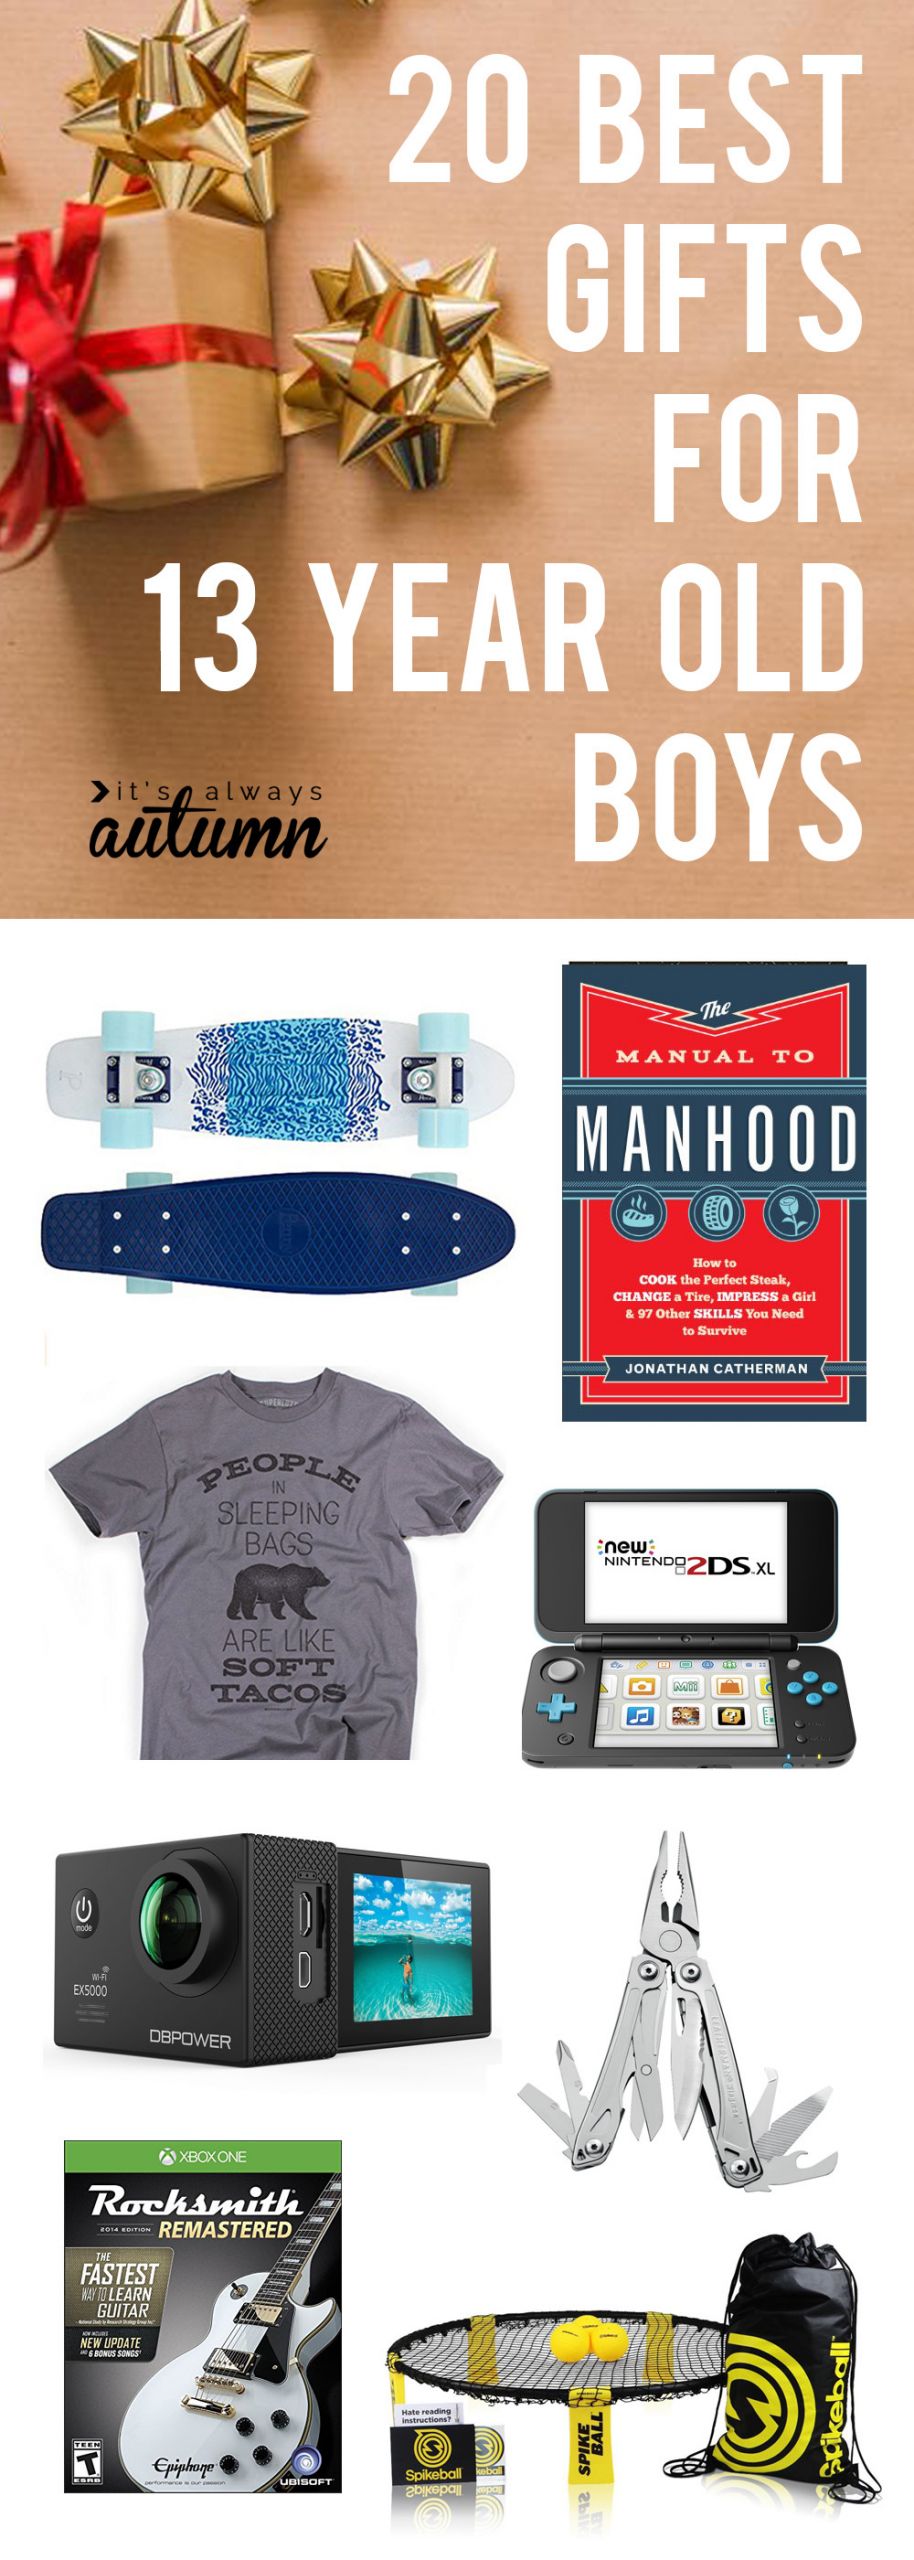 Top Gift Ideas For 12 Year Old Boys
 best Christmas ts for 13 year old boys It s Always Autumn